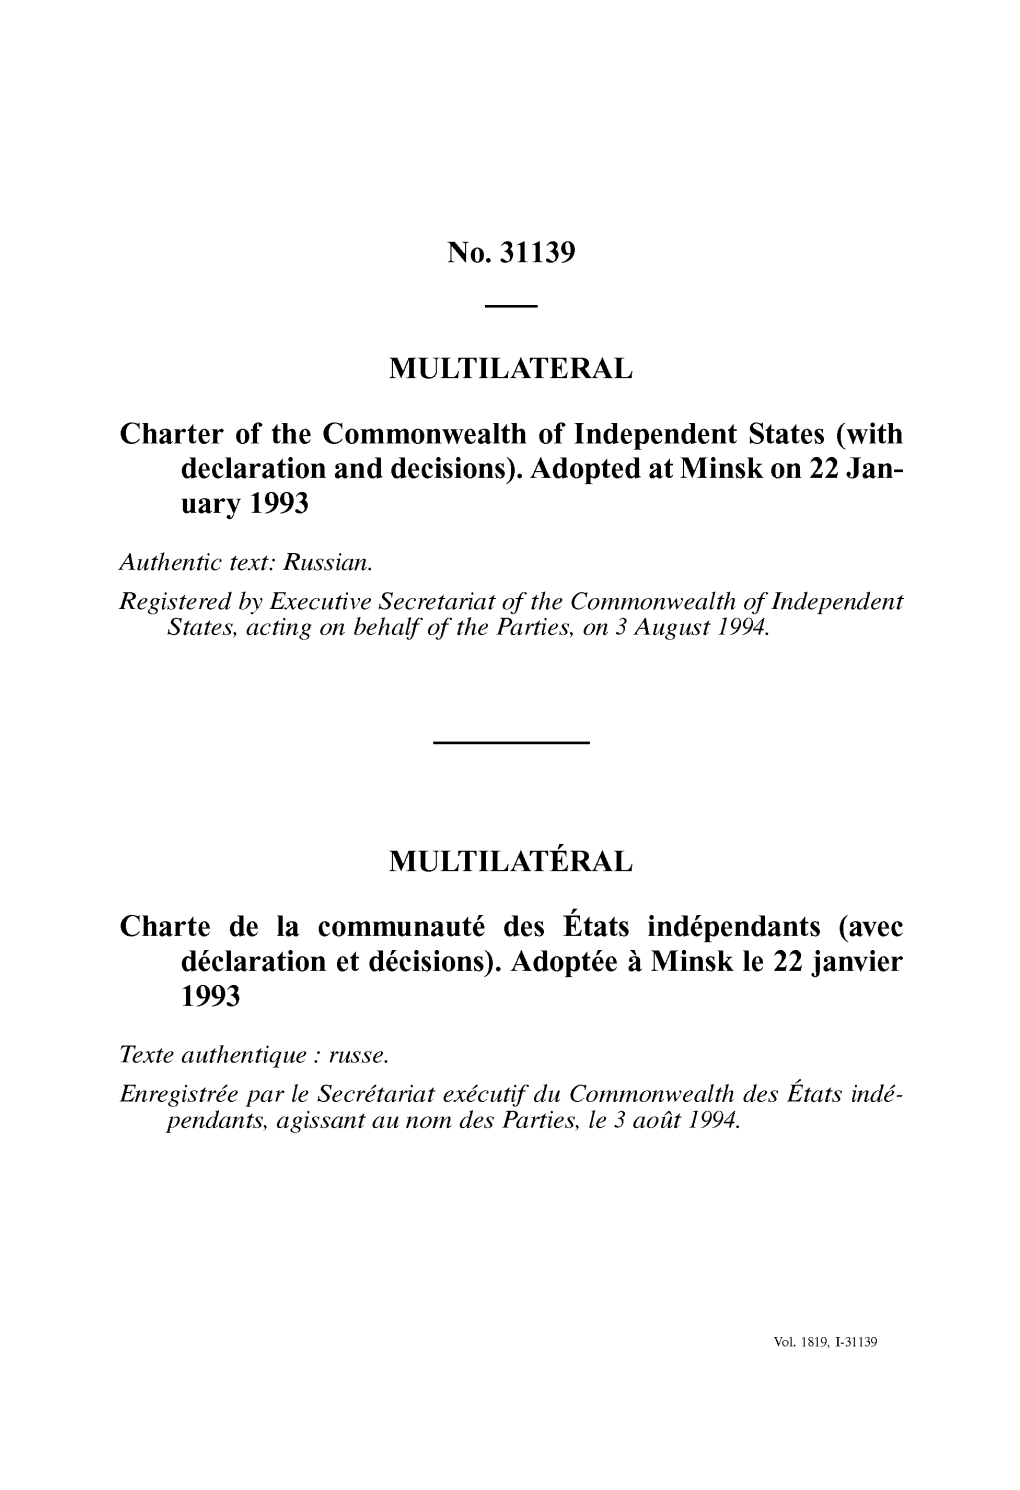 No. 31139 MULTILATERAL Charter of the Commonwealth of Independent